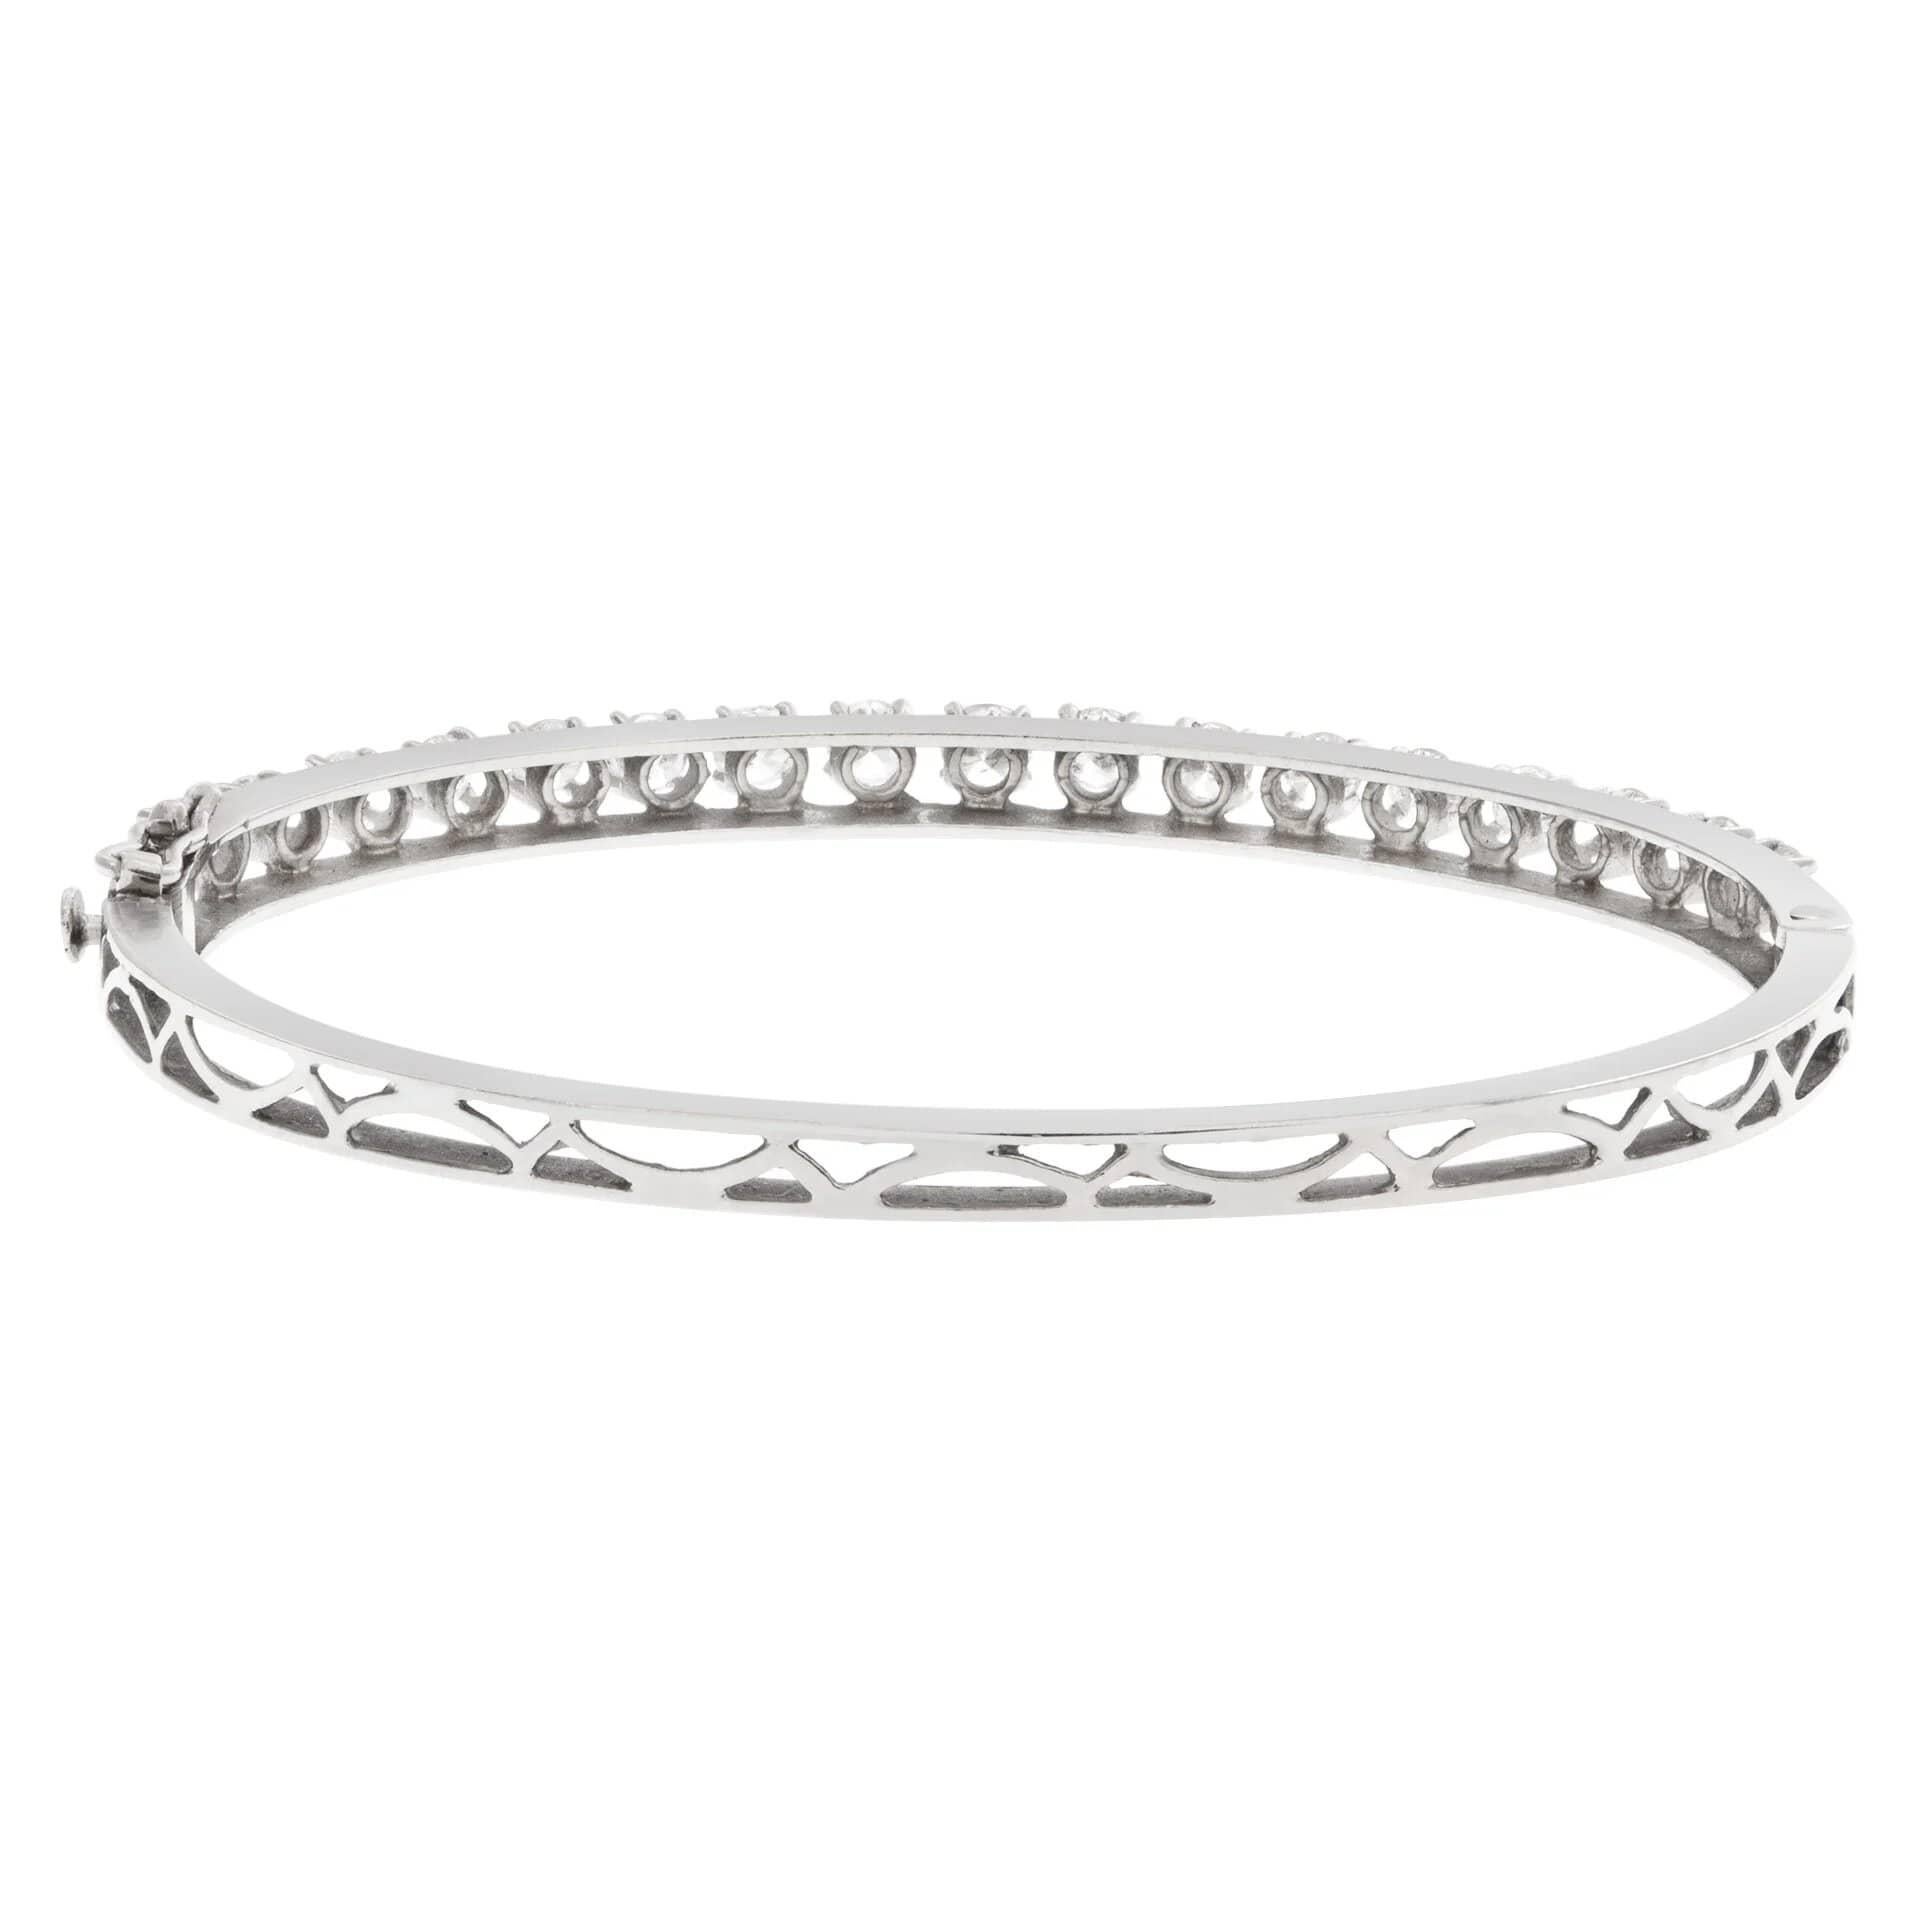 Diamond bangle in 14k white gold In Excellent Condition For Sale In Surfside, FL